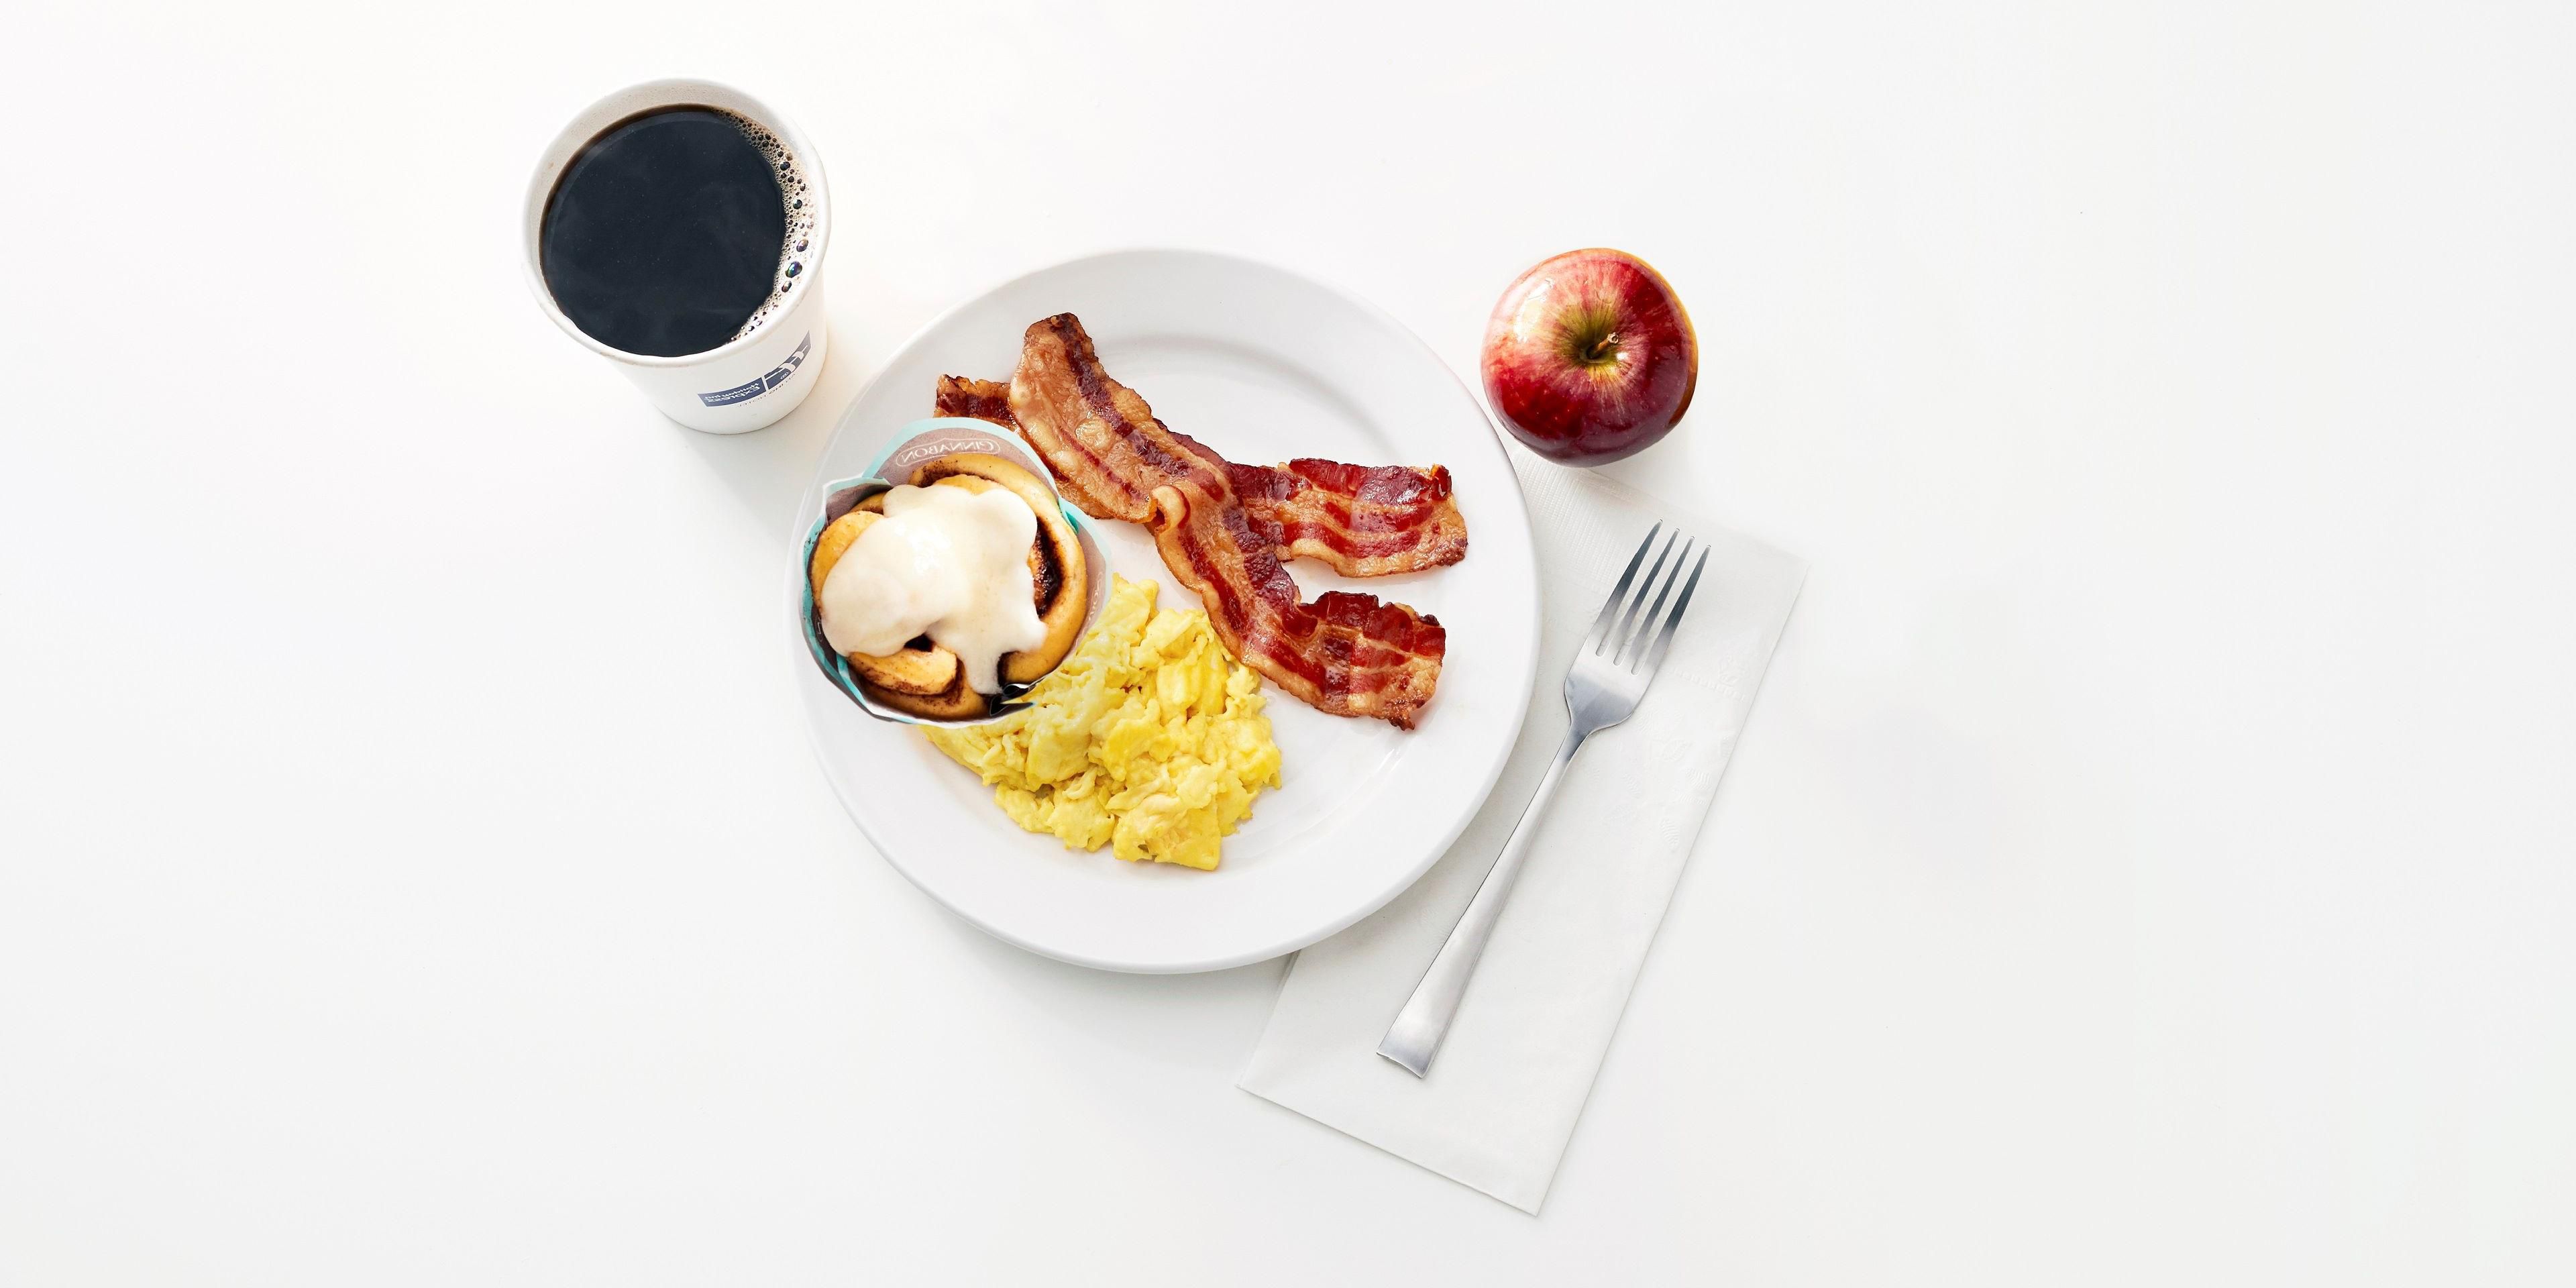 Kick start your day with our Express Start Breakfast, with grab ‘n’ go options and favorites such as eggs and bacon, hot pancakes, our signature cinnamon rolls and fresh coffee. Offered from 6:30 AM - 9:30 AM. 